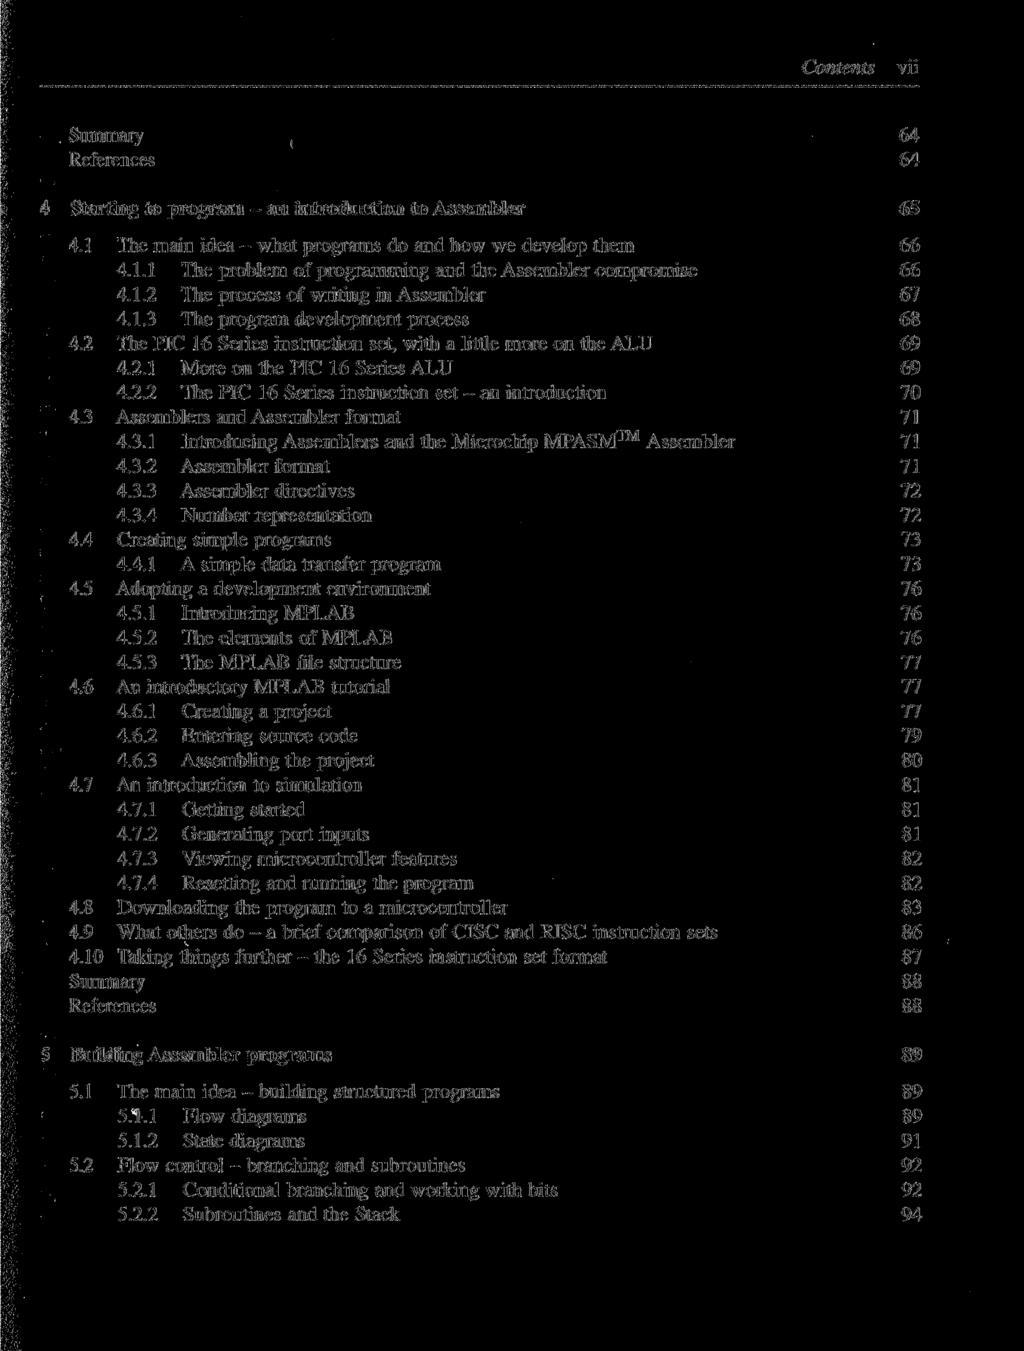 Contents vii Summary ( 64 References 64 4 Starting to program - an introduction to Assembler 65 4.1 The main idea - what programs do and how we develop them 66 4.1.1 The problem of programming and the Assembler compromise 66 4.